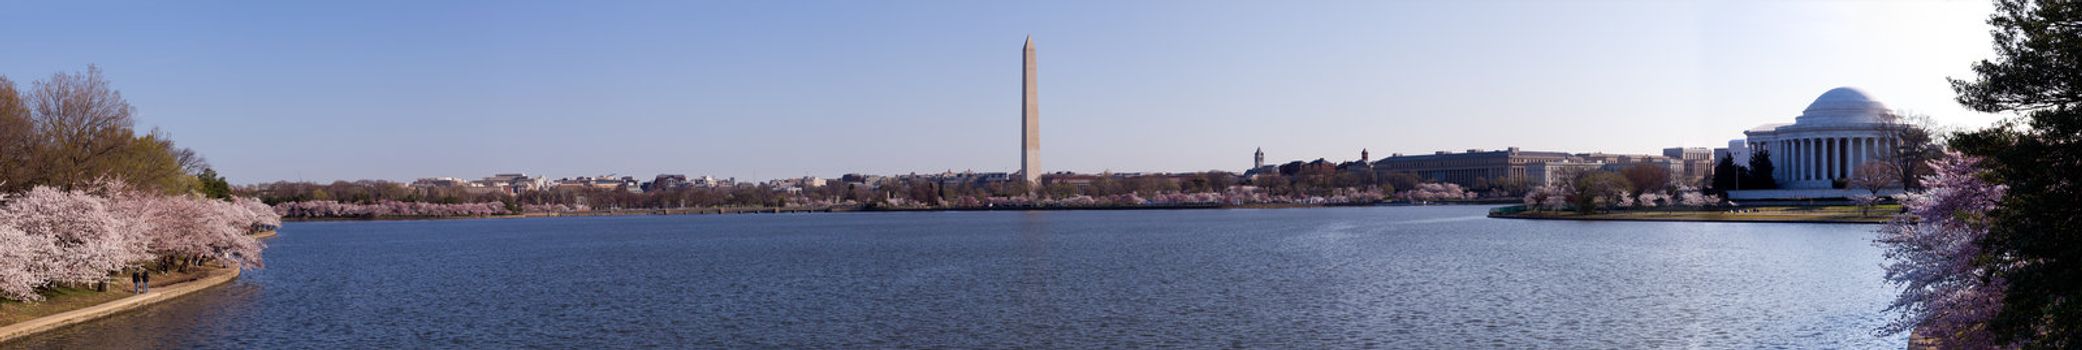 Washington Monument and Jefferson Memorial in panorama of Tidal Basin and surrounded by pink Japanese Cherry blossoms